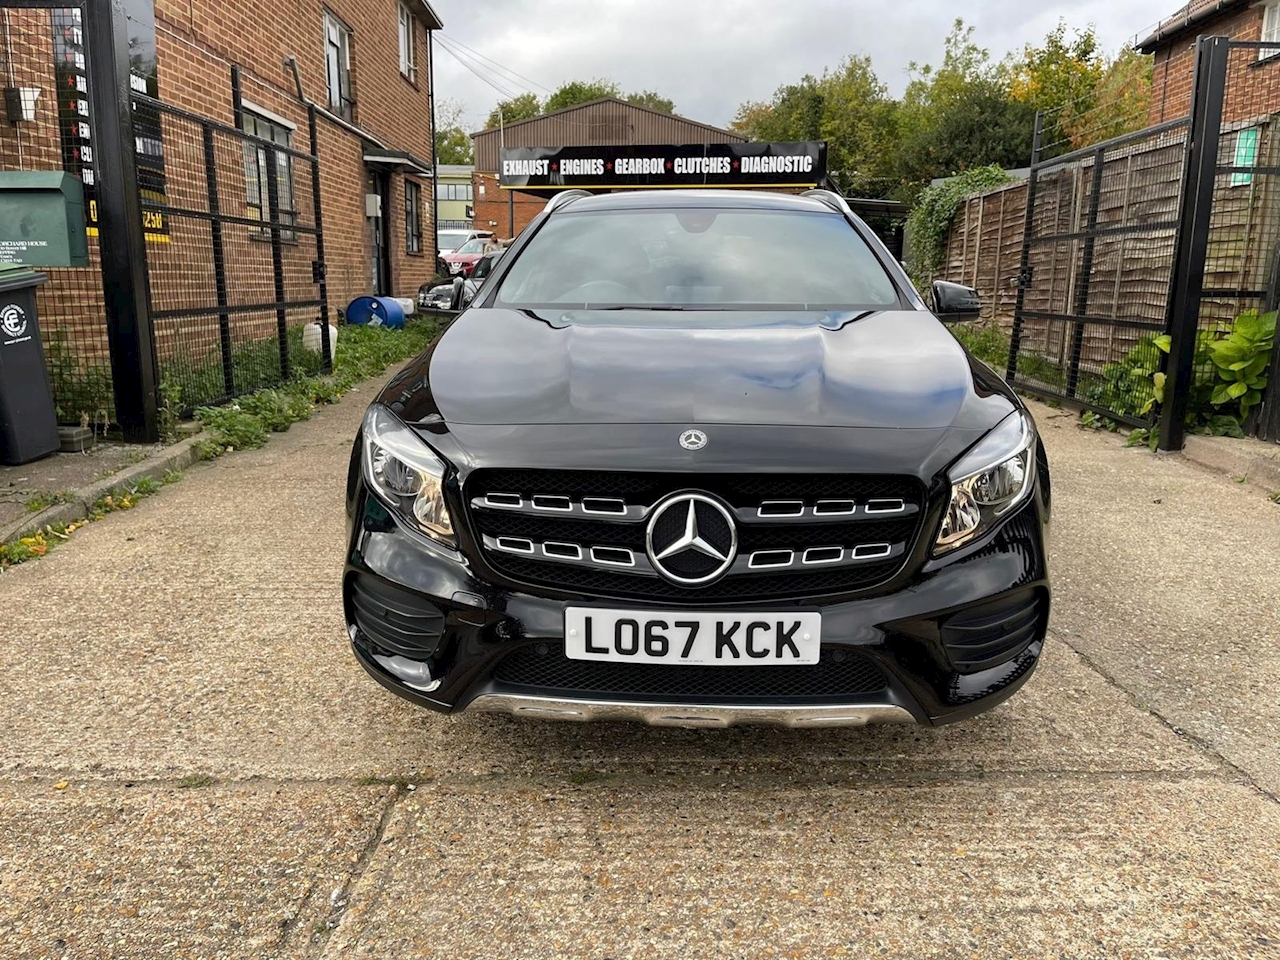 2.1 GLA220d AMG Line SUV 5dr Diesel 7G-DCT 4MATIC (s/s) (177 ps)